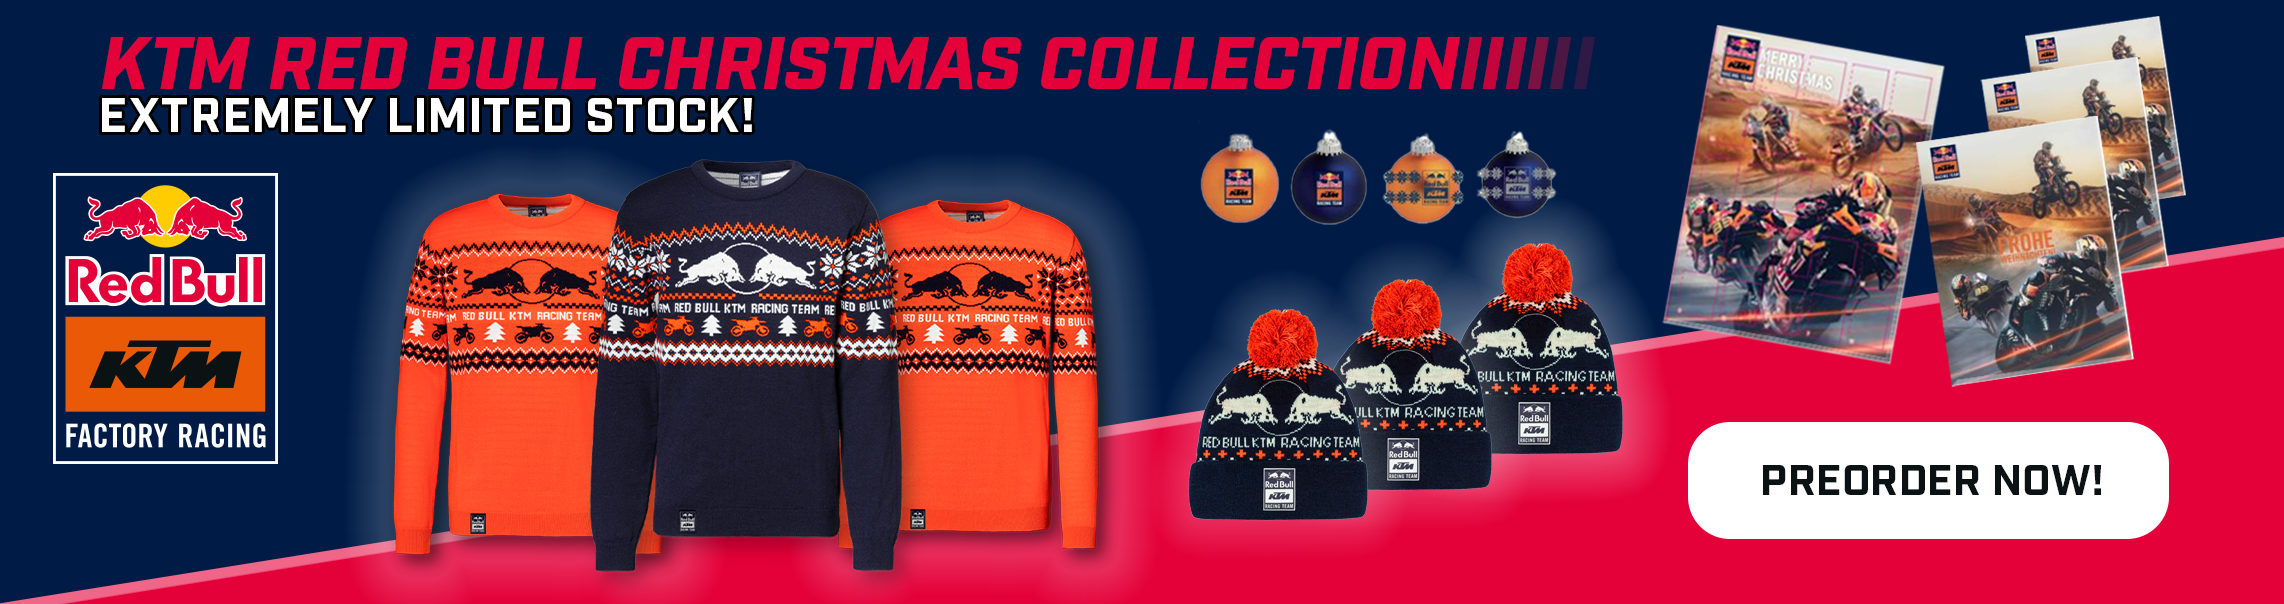 website-banner-red-bull-christmas-collection1.png